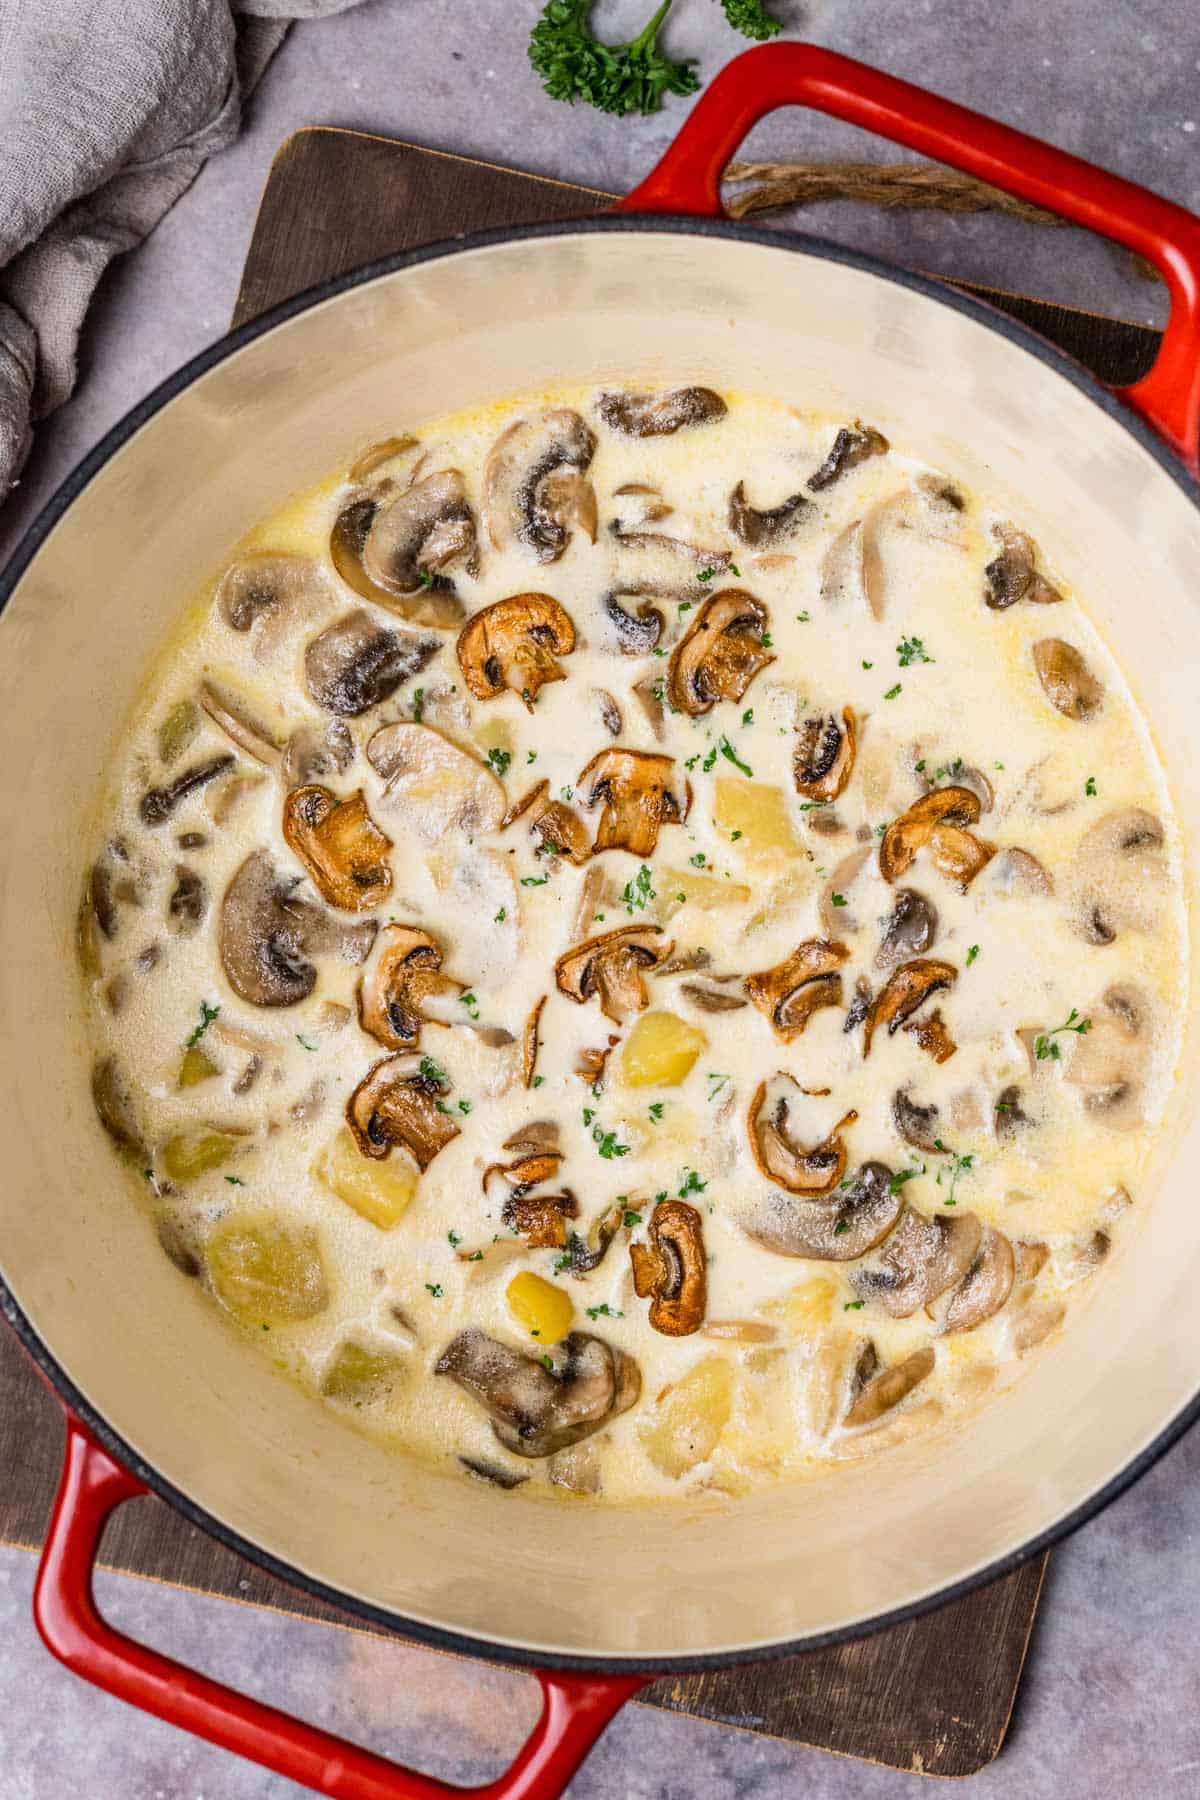 Homemade Cream Of Mushroom Soup is full of flavor and so easy to make yourself from scratch. A great variety of traditional soups and ready in minutes! - The Yummy Bowl